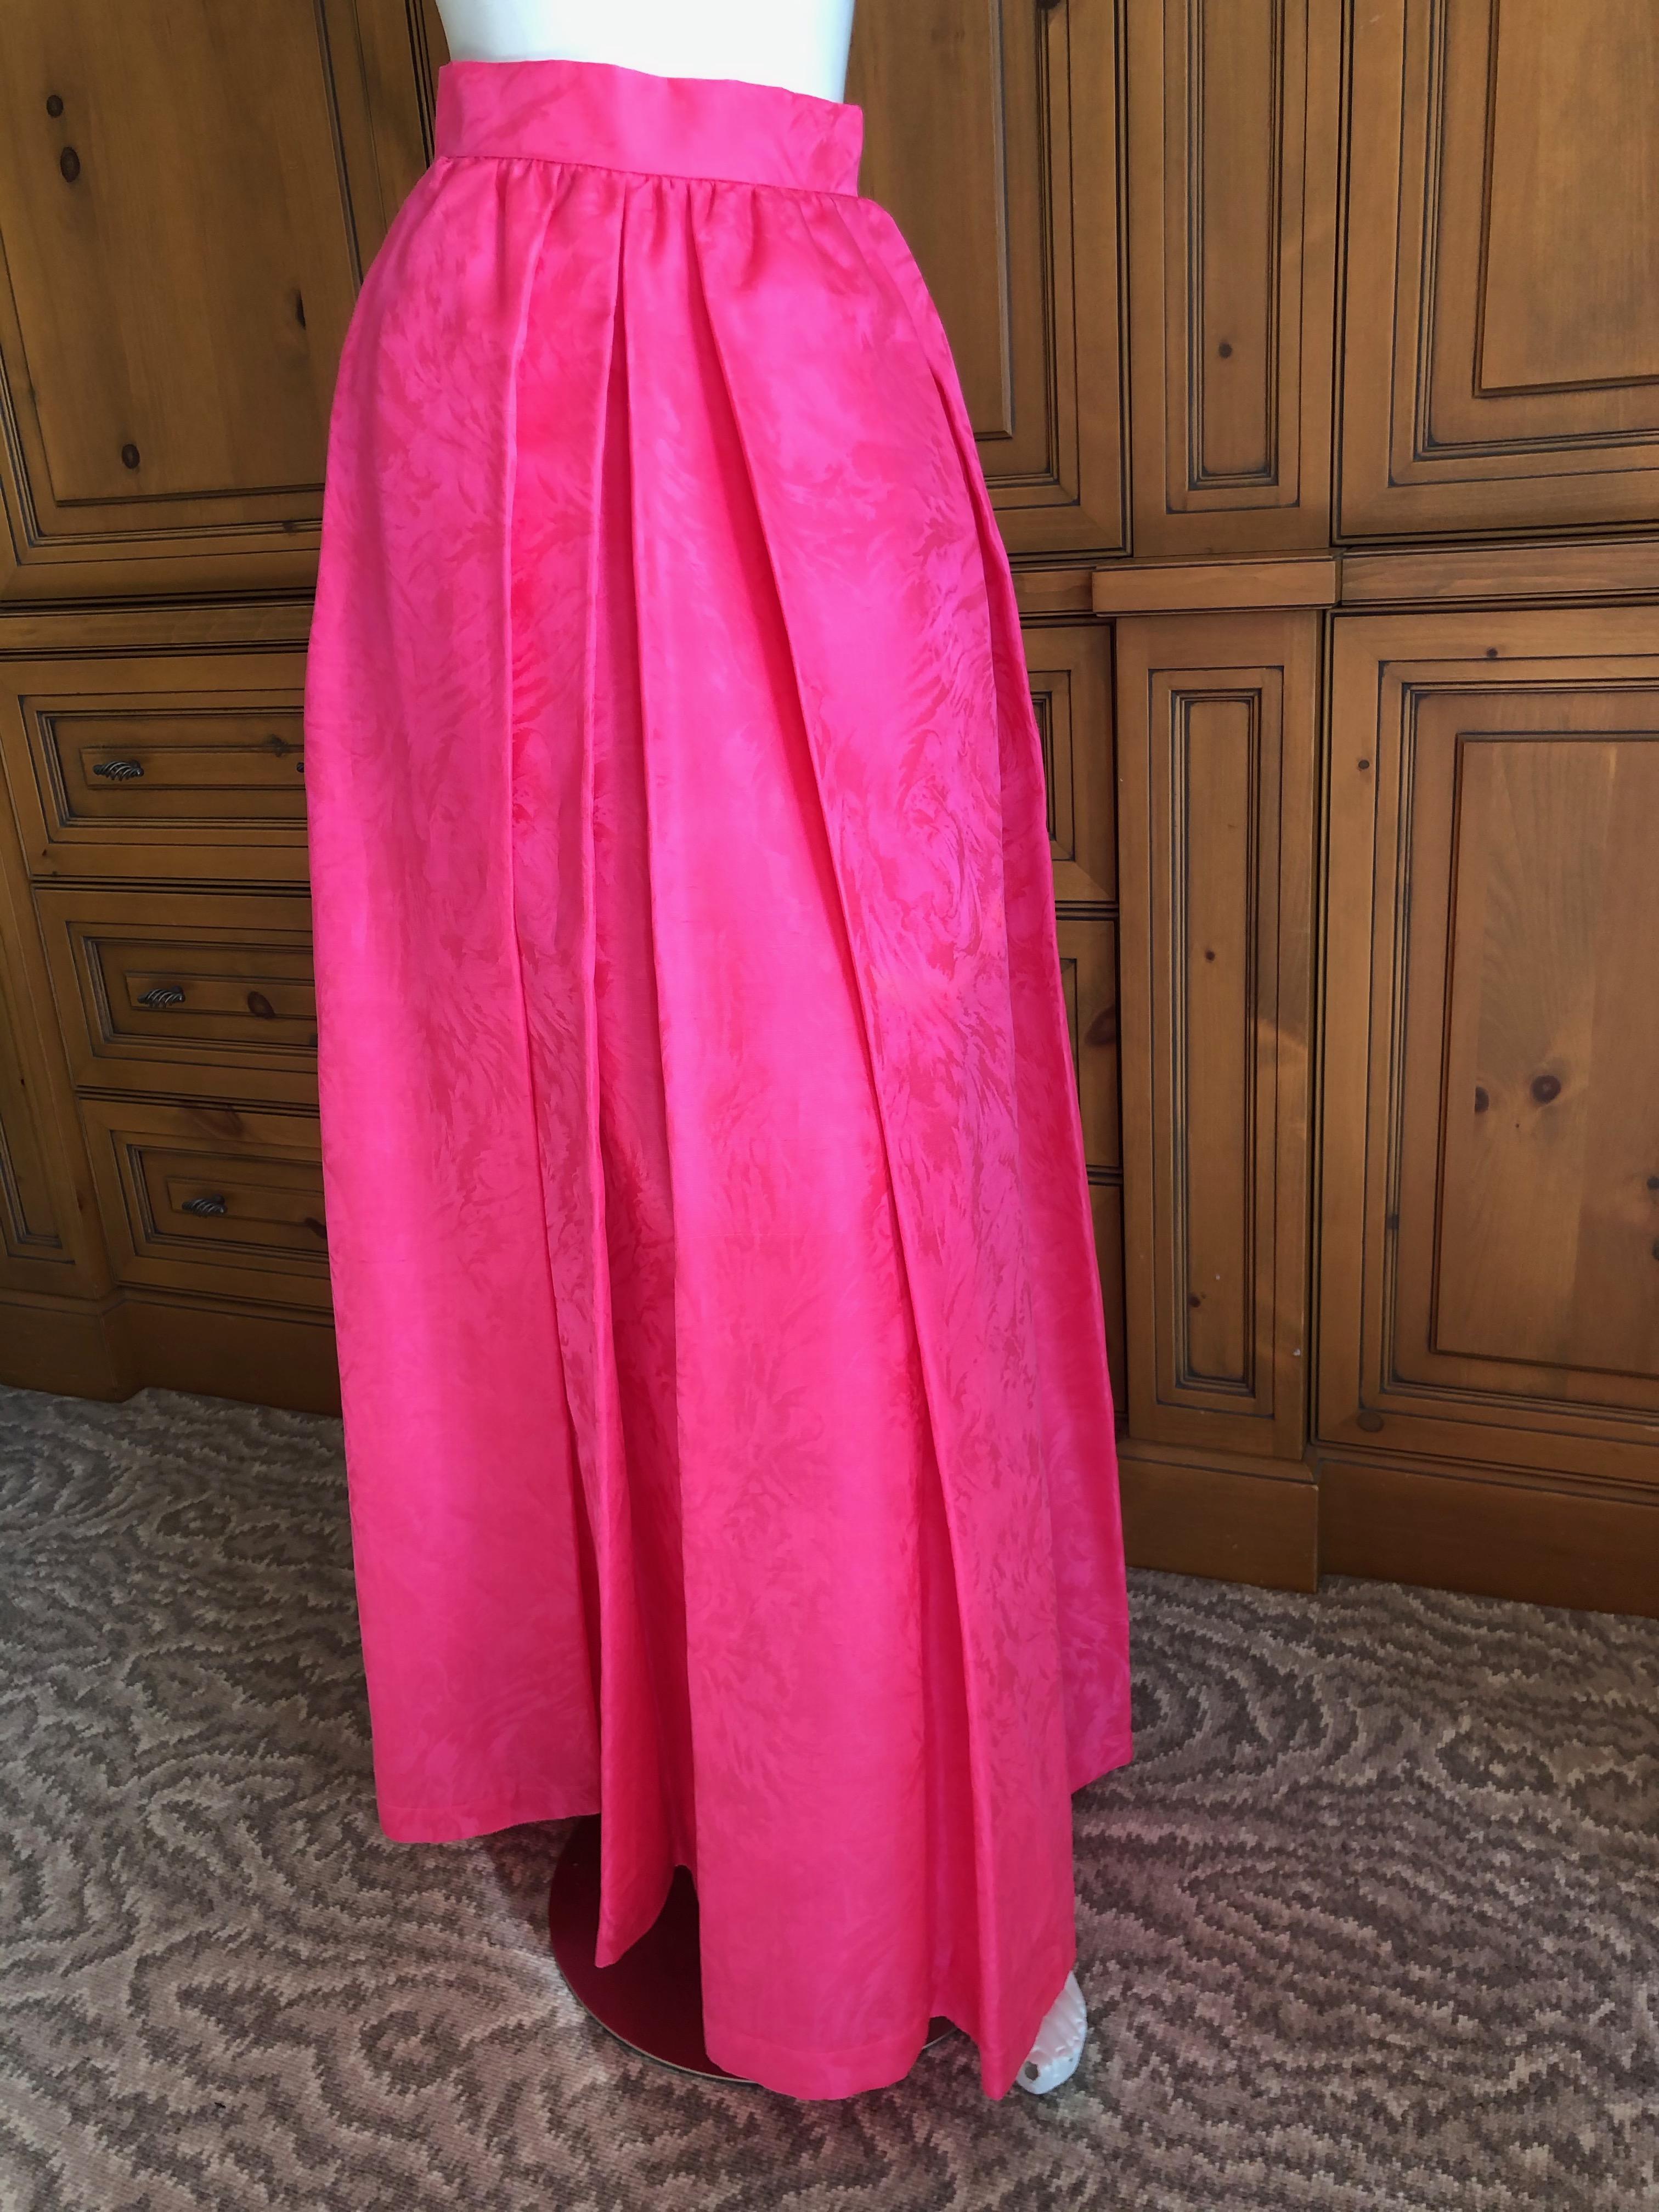 Yves Saint Laurent Rive Gauche Vintage 70's Pink Silk Faille Ball Skirt Pockets In Excellent Condition For Sale In Cloverdale, CA